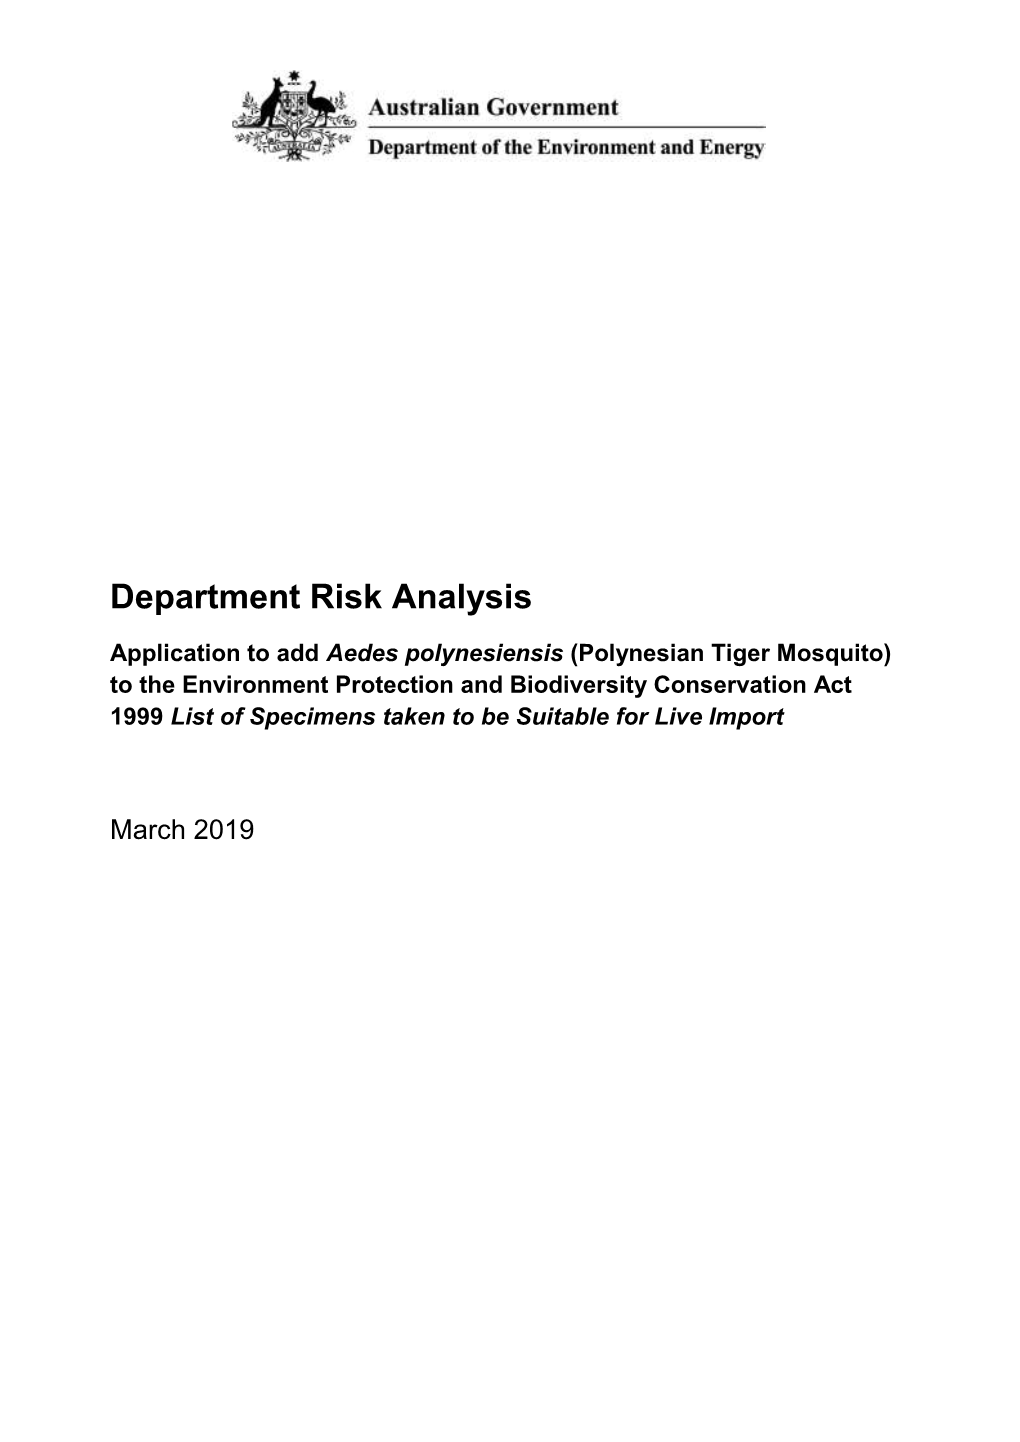 Department Risk Analysis Application to Add Aedes Polynesiensis